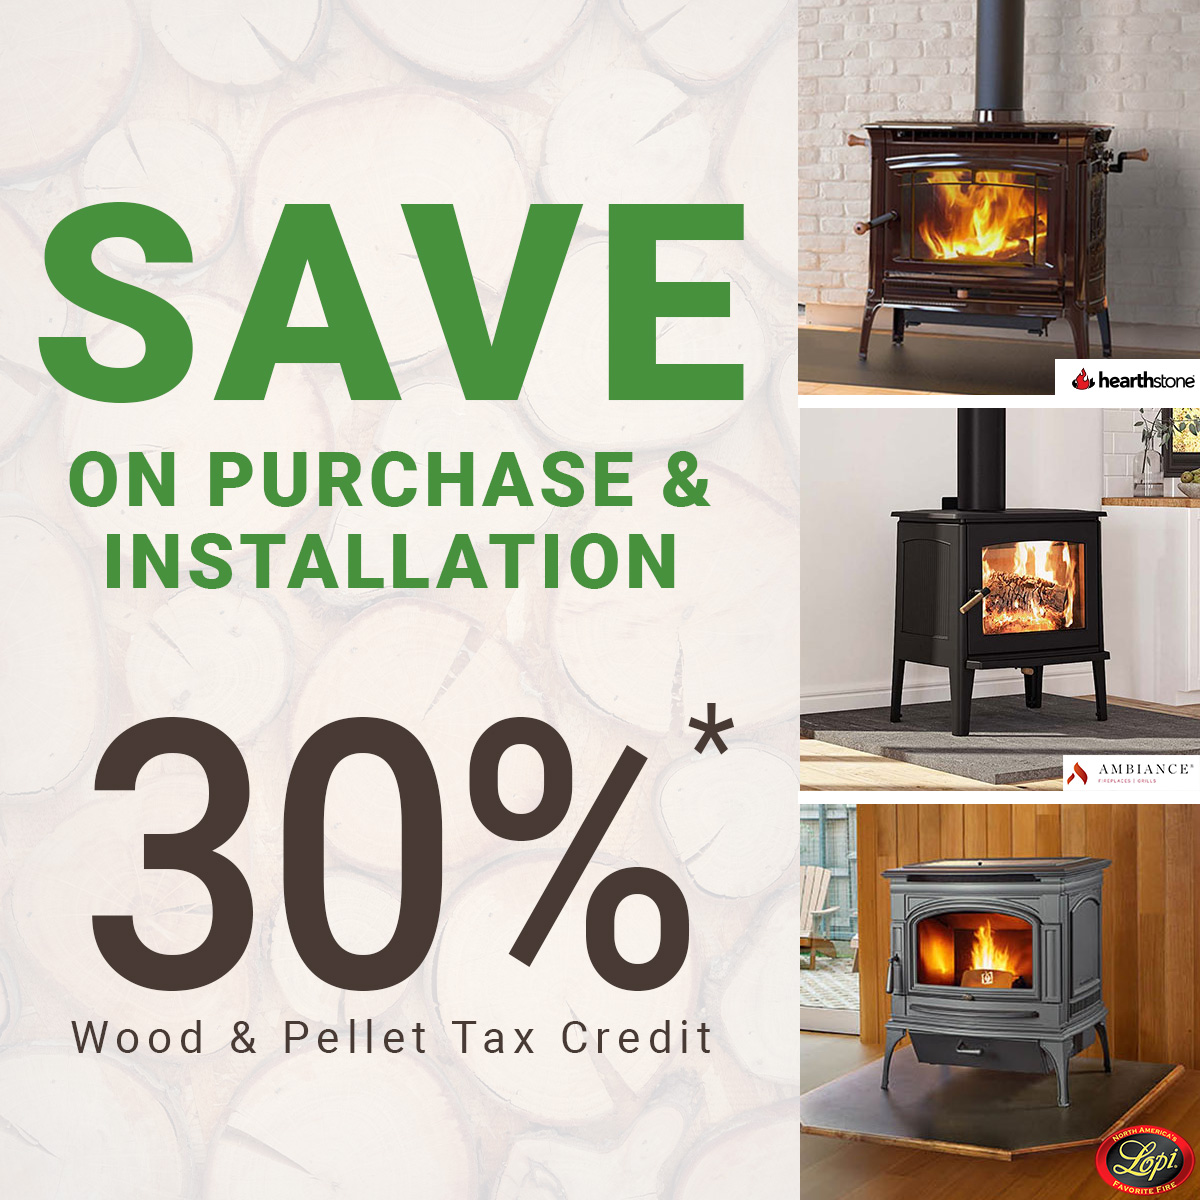 wood and pellet federal tax credit. save 30% (up to $2,000 annually) on purchase and installation of select units